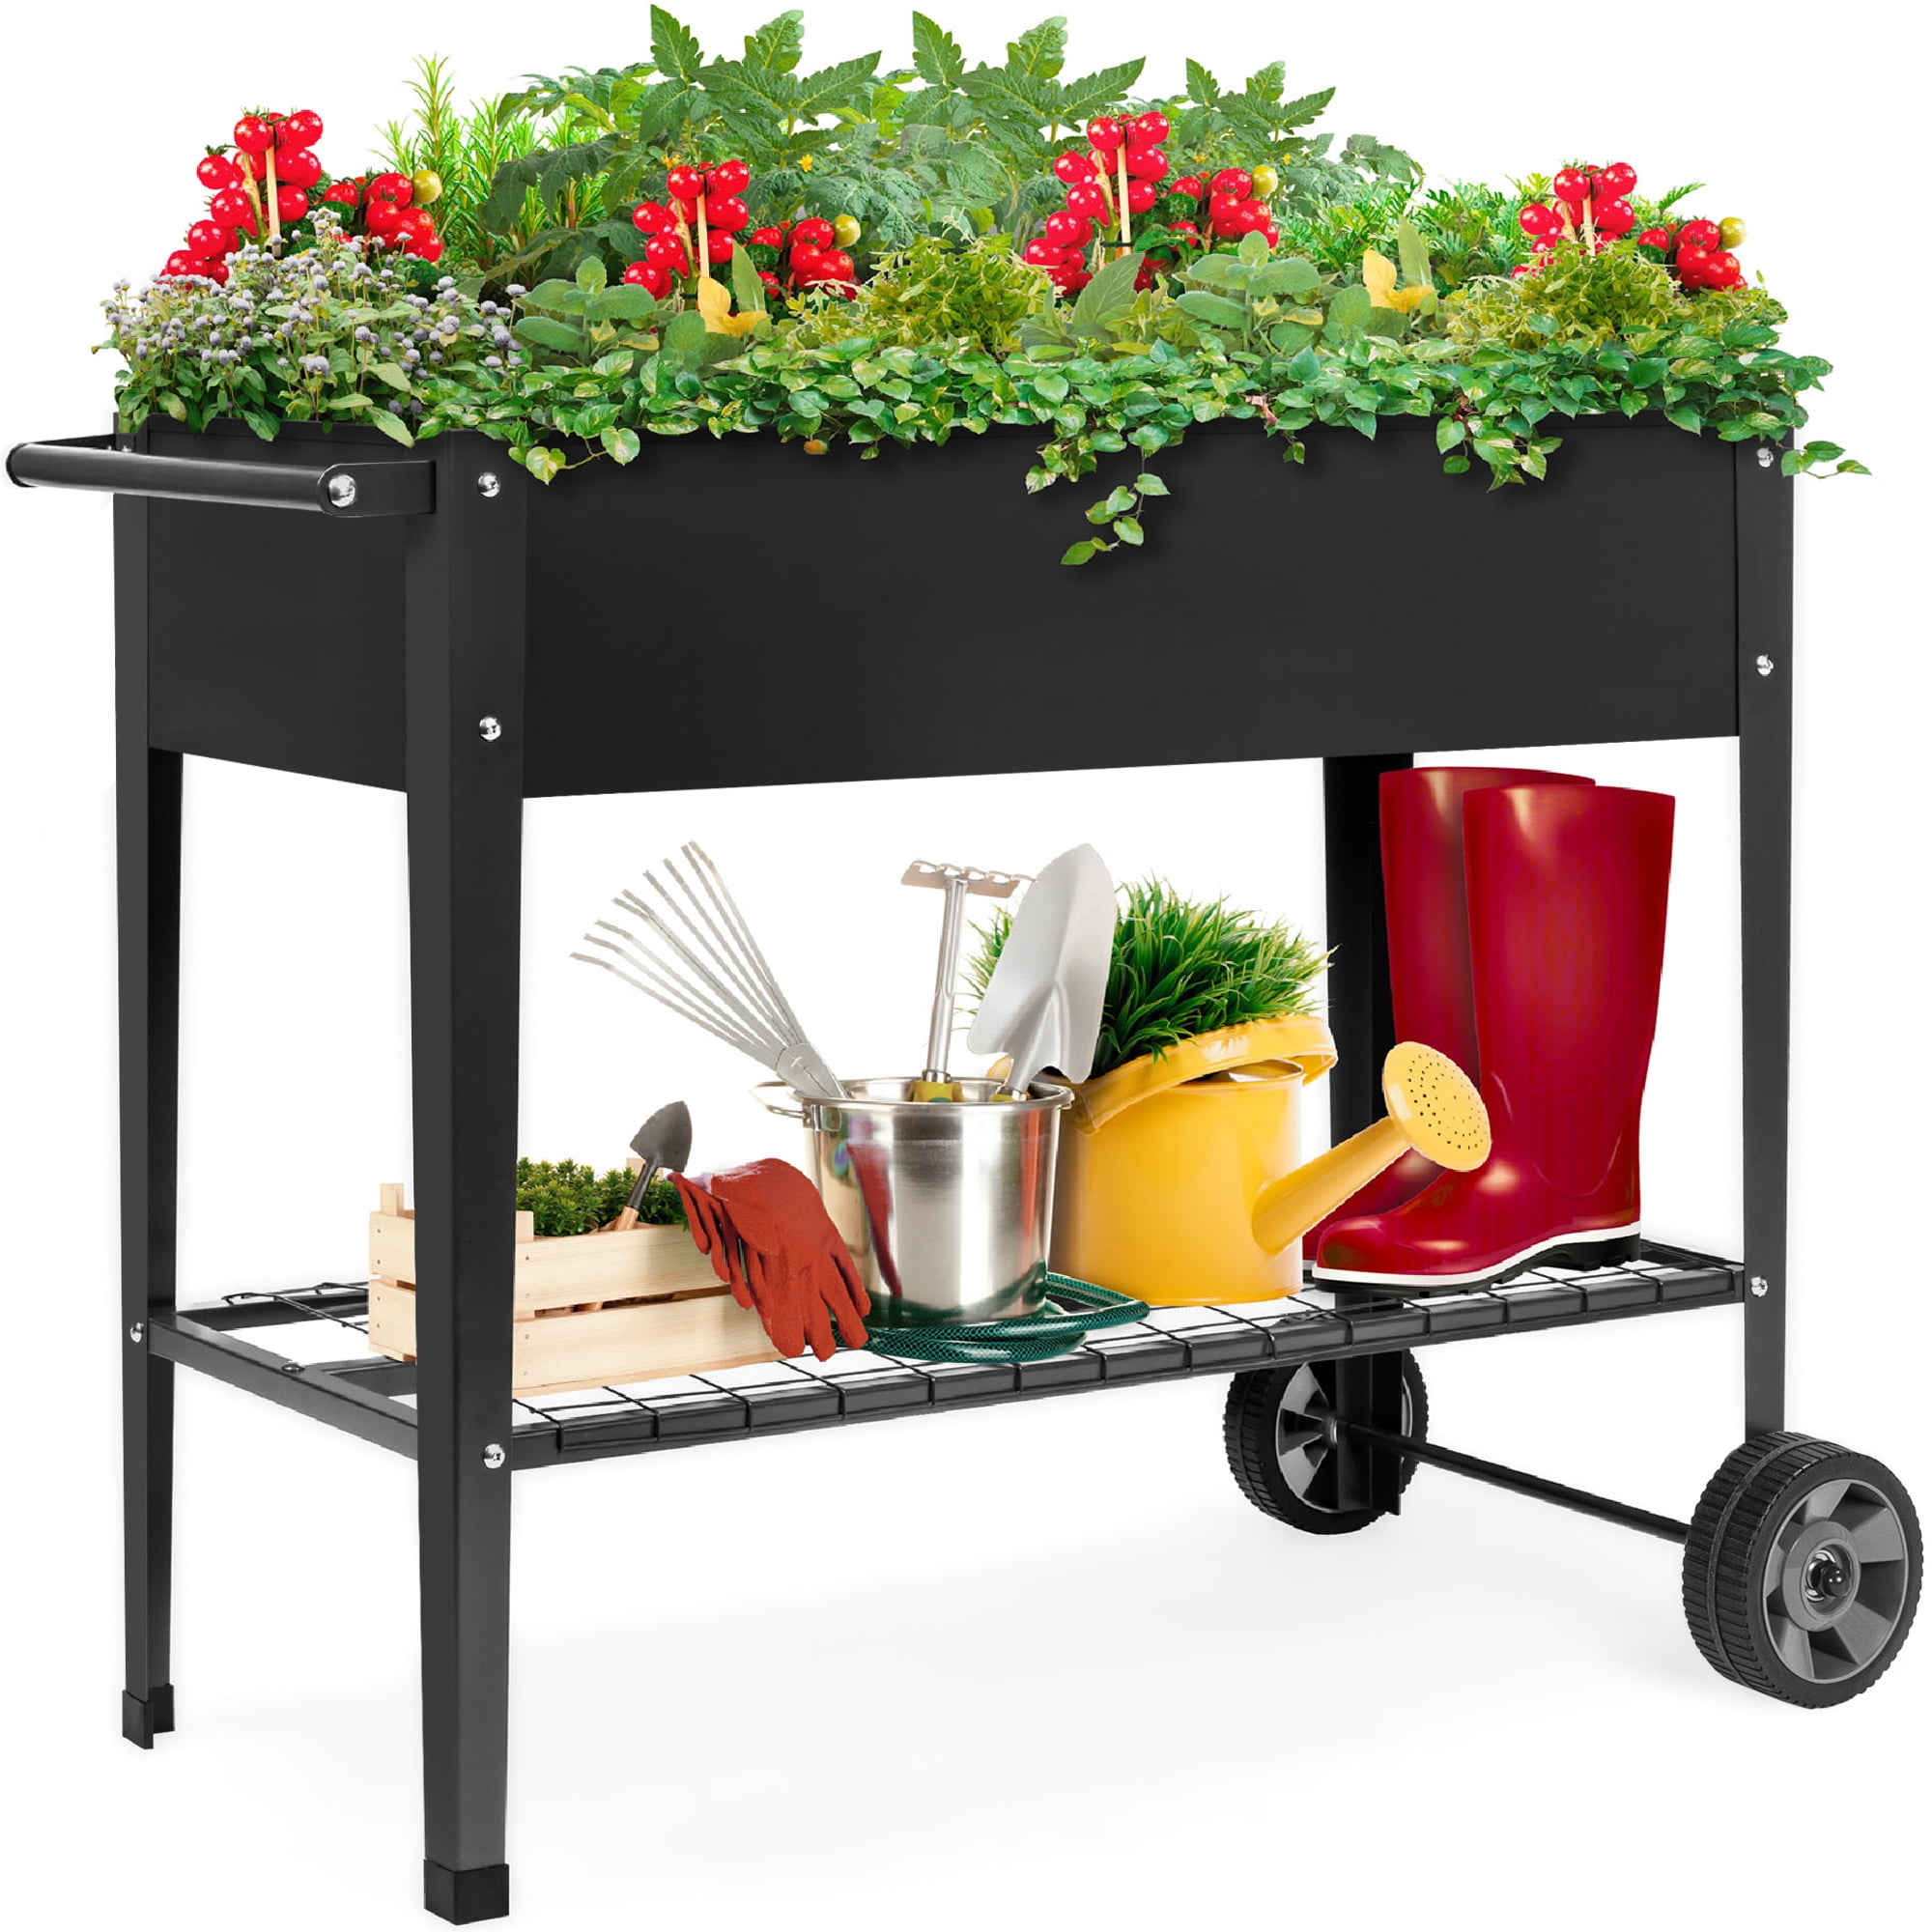 Standard Raised Metal Garden Planter Bed,Garden Planter Box,Planting Container with Legs Suitable for Outdoor Patio Planting Herbs and Vegetables